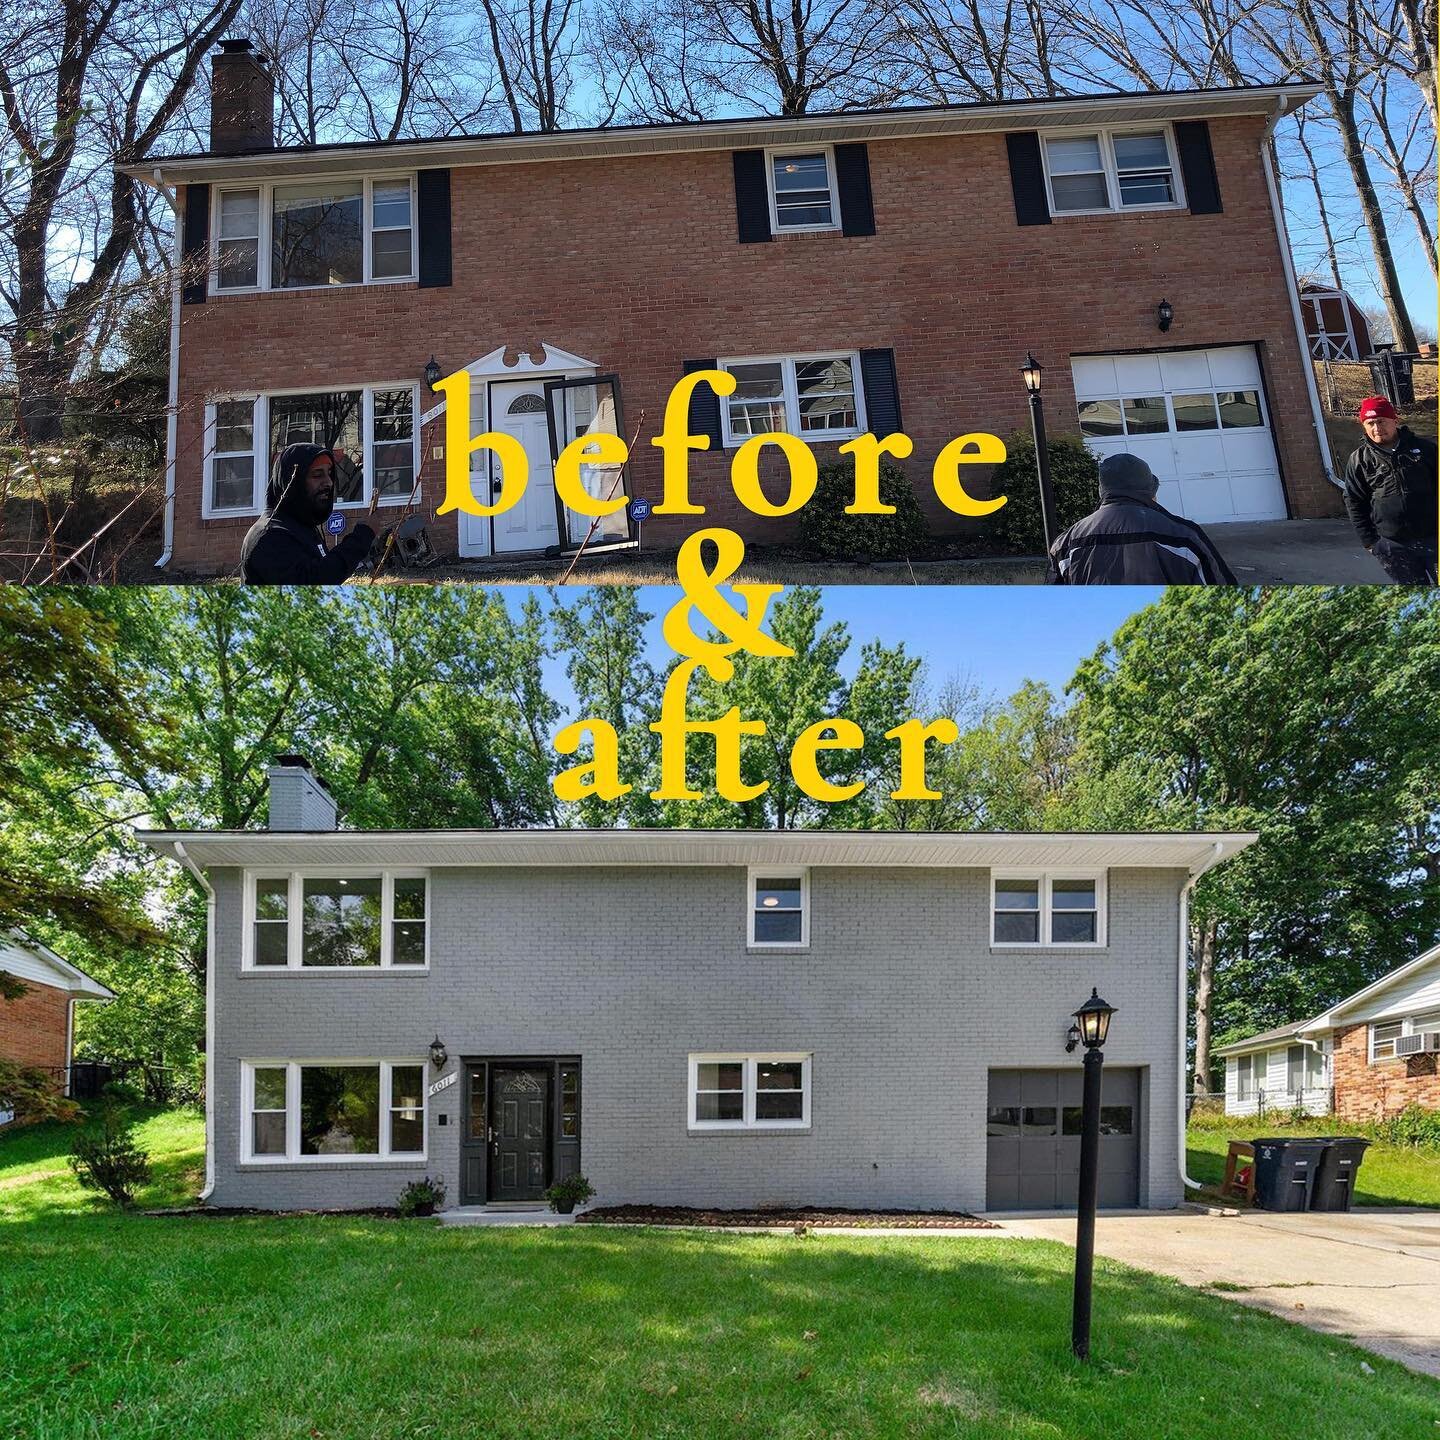 This is how it goes,

6011 Wesson Drive, Suitland MD

✅Purchased for 215K
✅Renovation came out to 55K
✅Listed for 375K
✅Accepted a contract for 365K
Now we&rsquo;re just waiting for it to close 💪🏽

Calculate the difference in the comments, we tryna